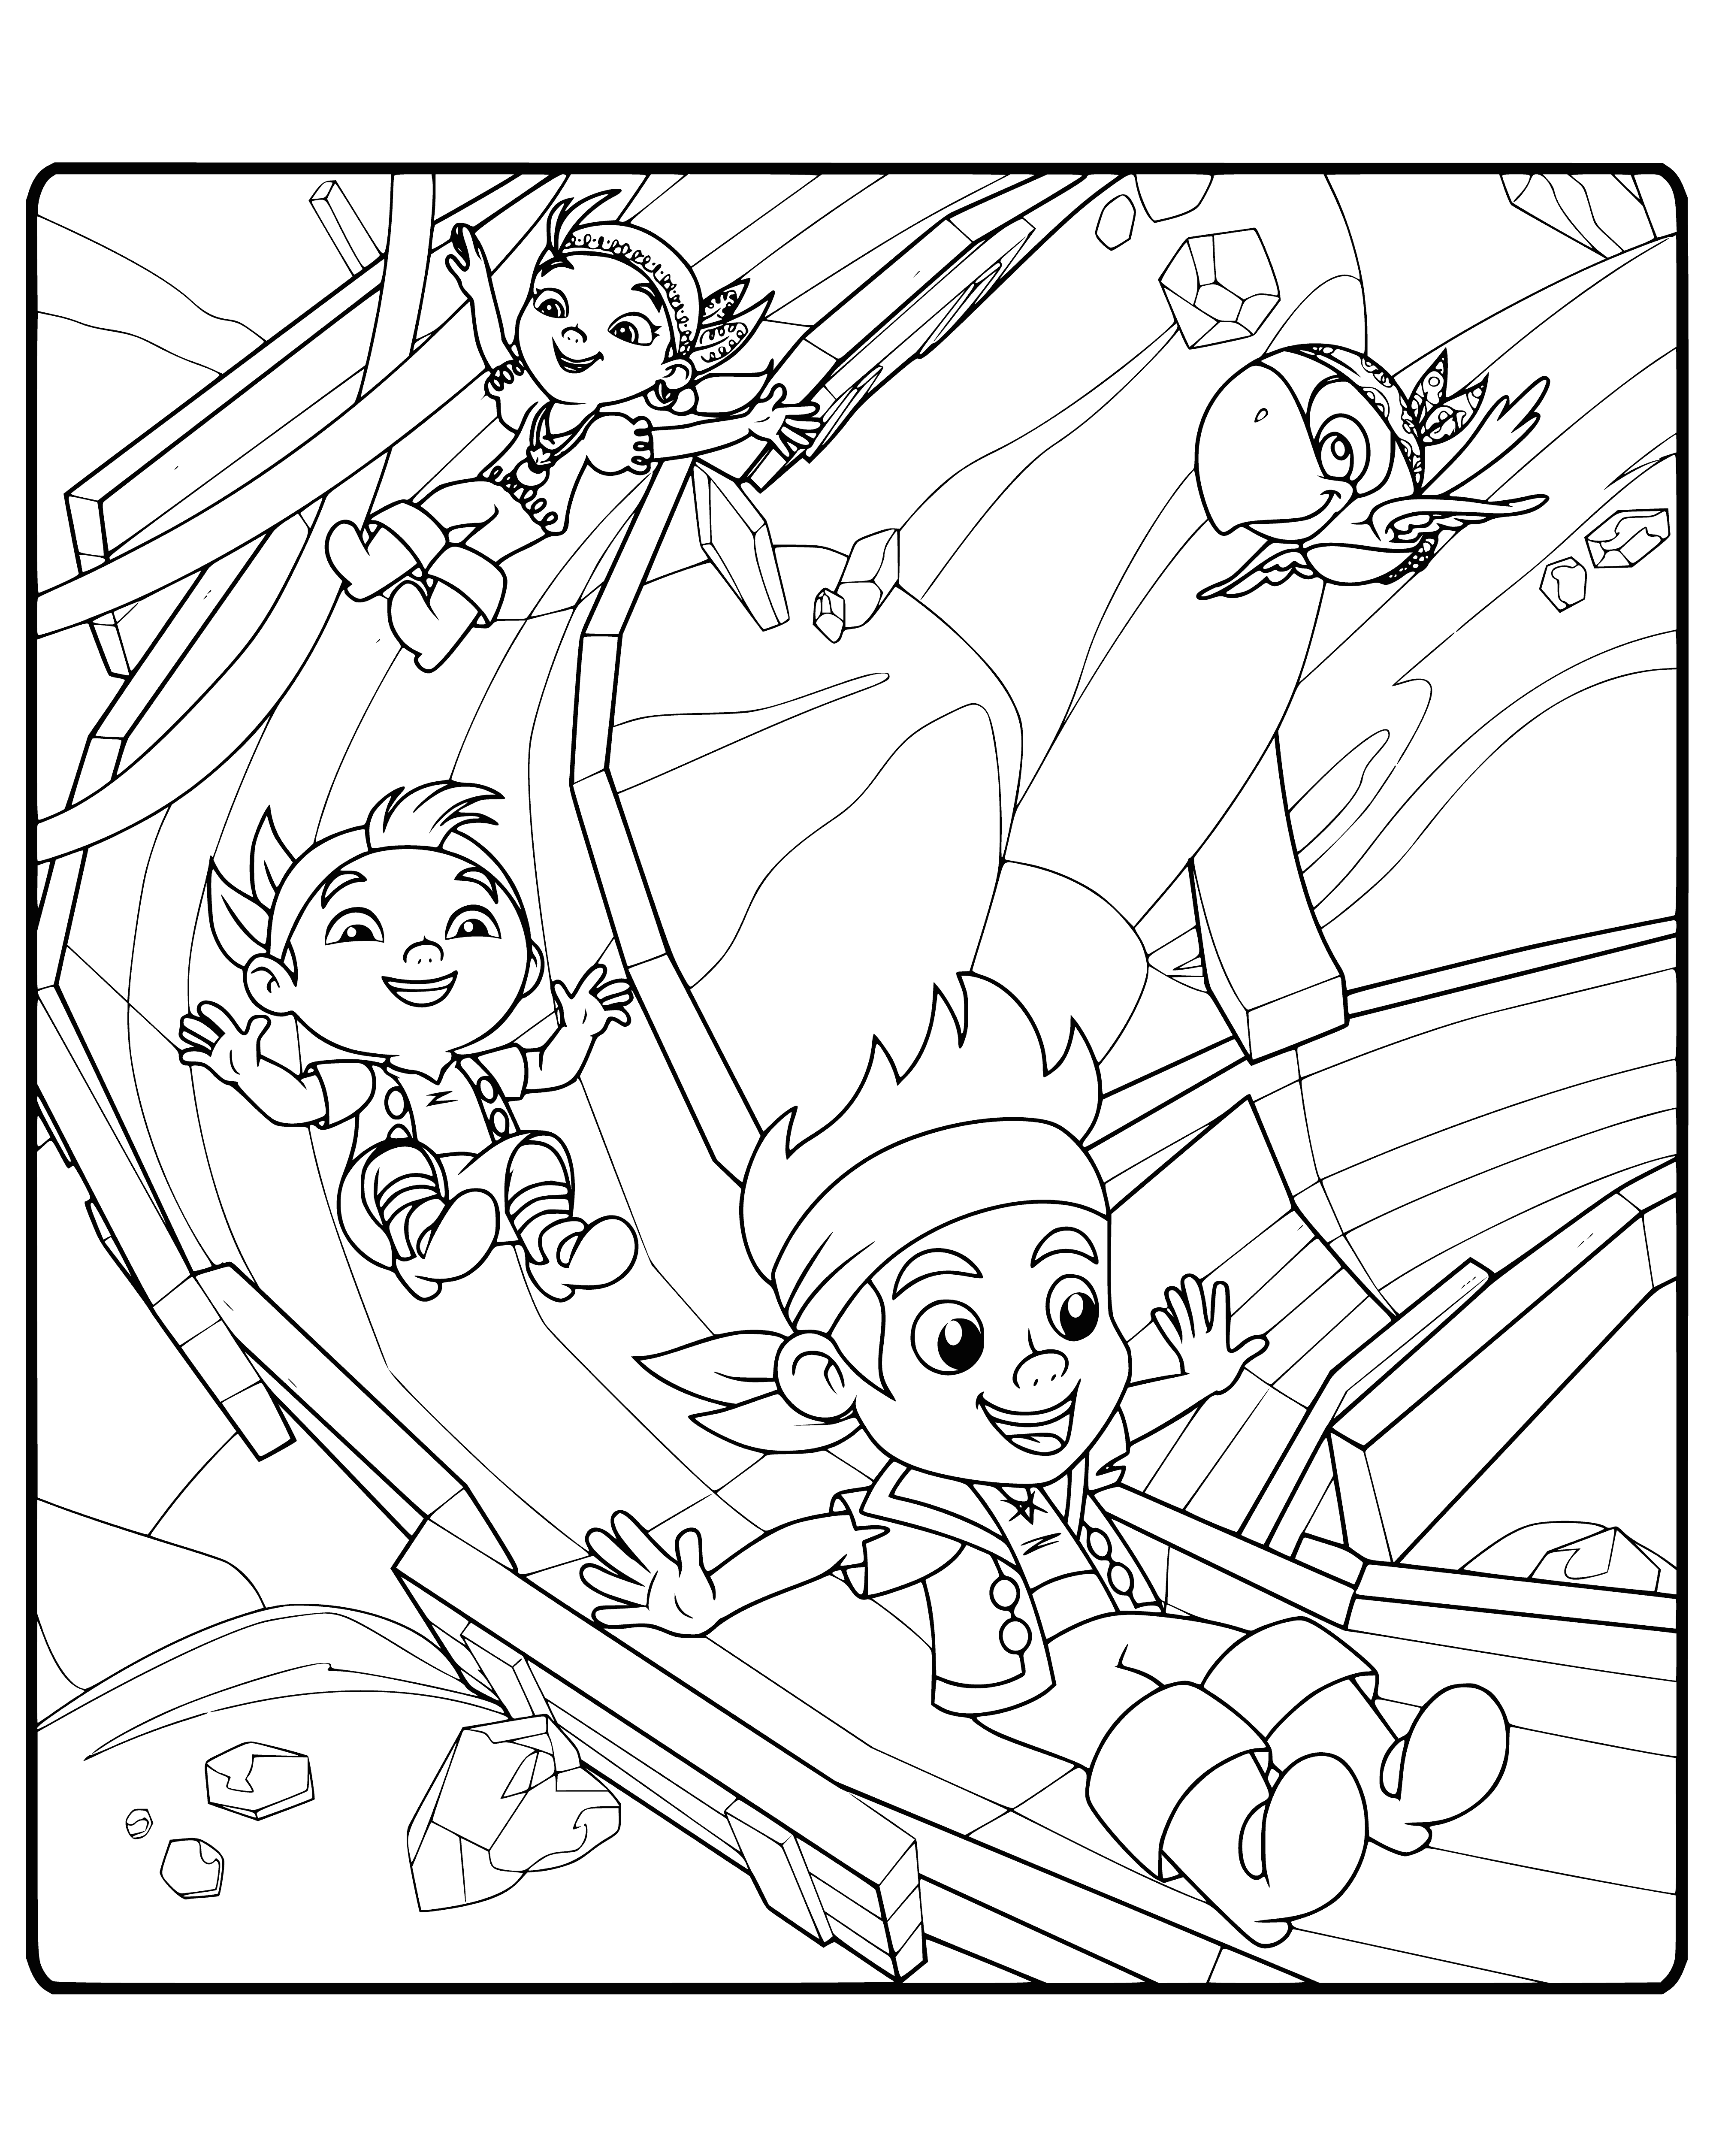 coloring page: Friends Jake, Cubby and Izzy roll down a hill while admiring the beautiful green trees and blue sky.